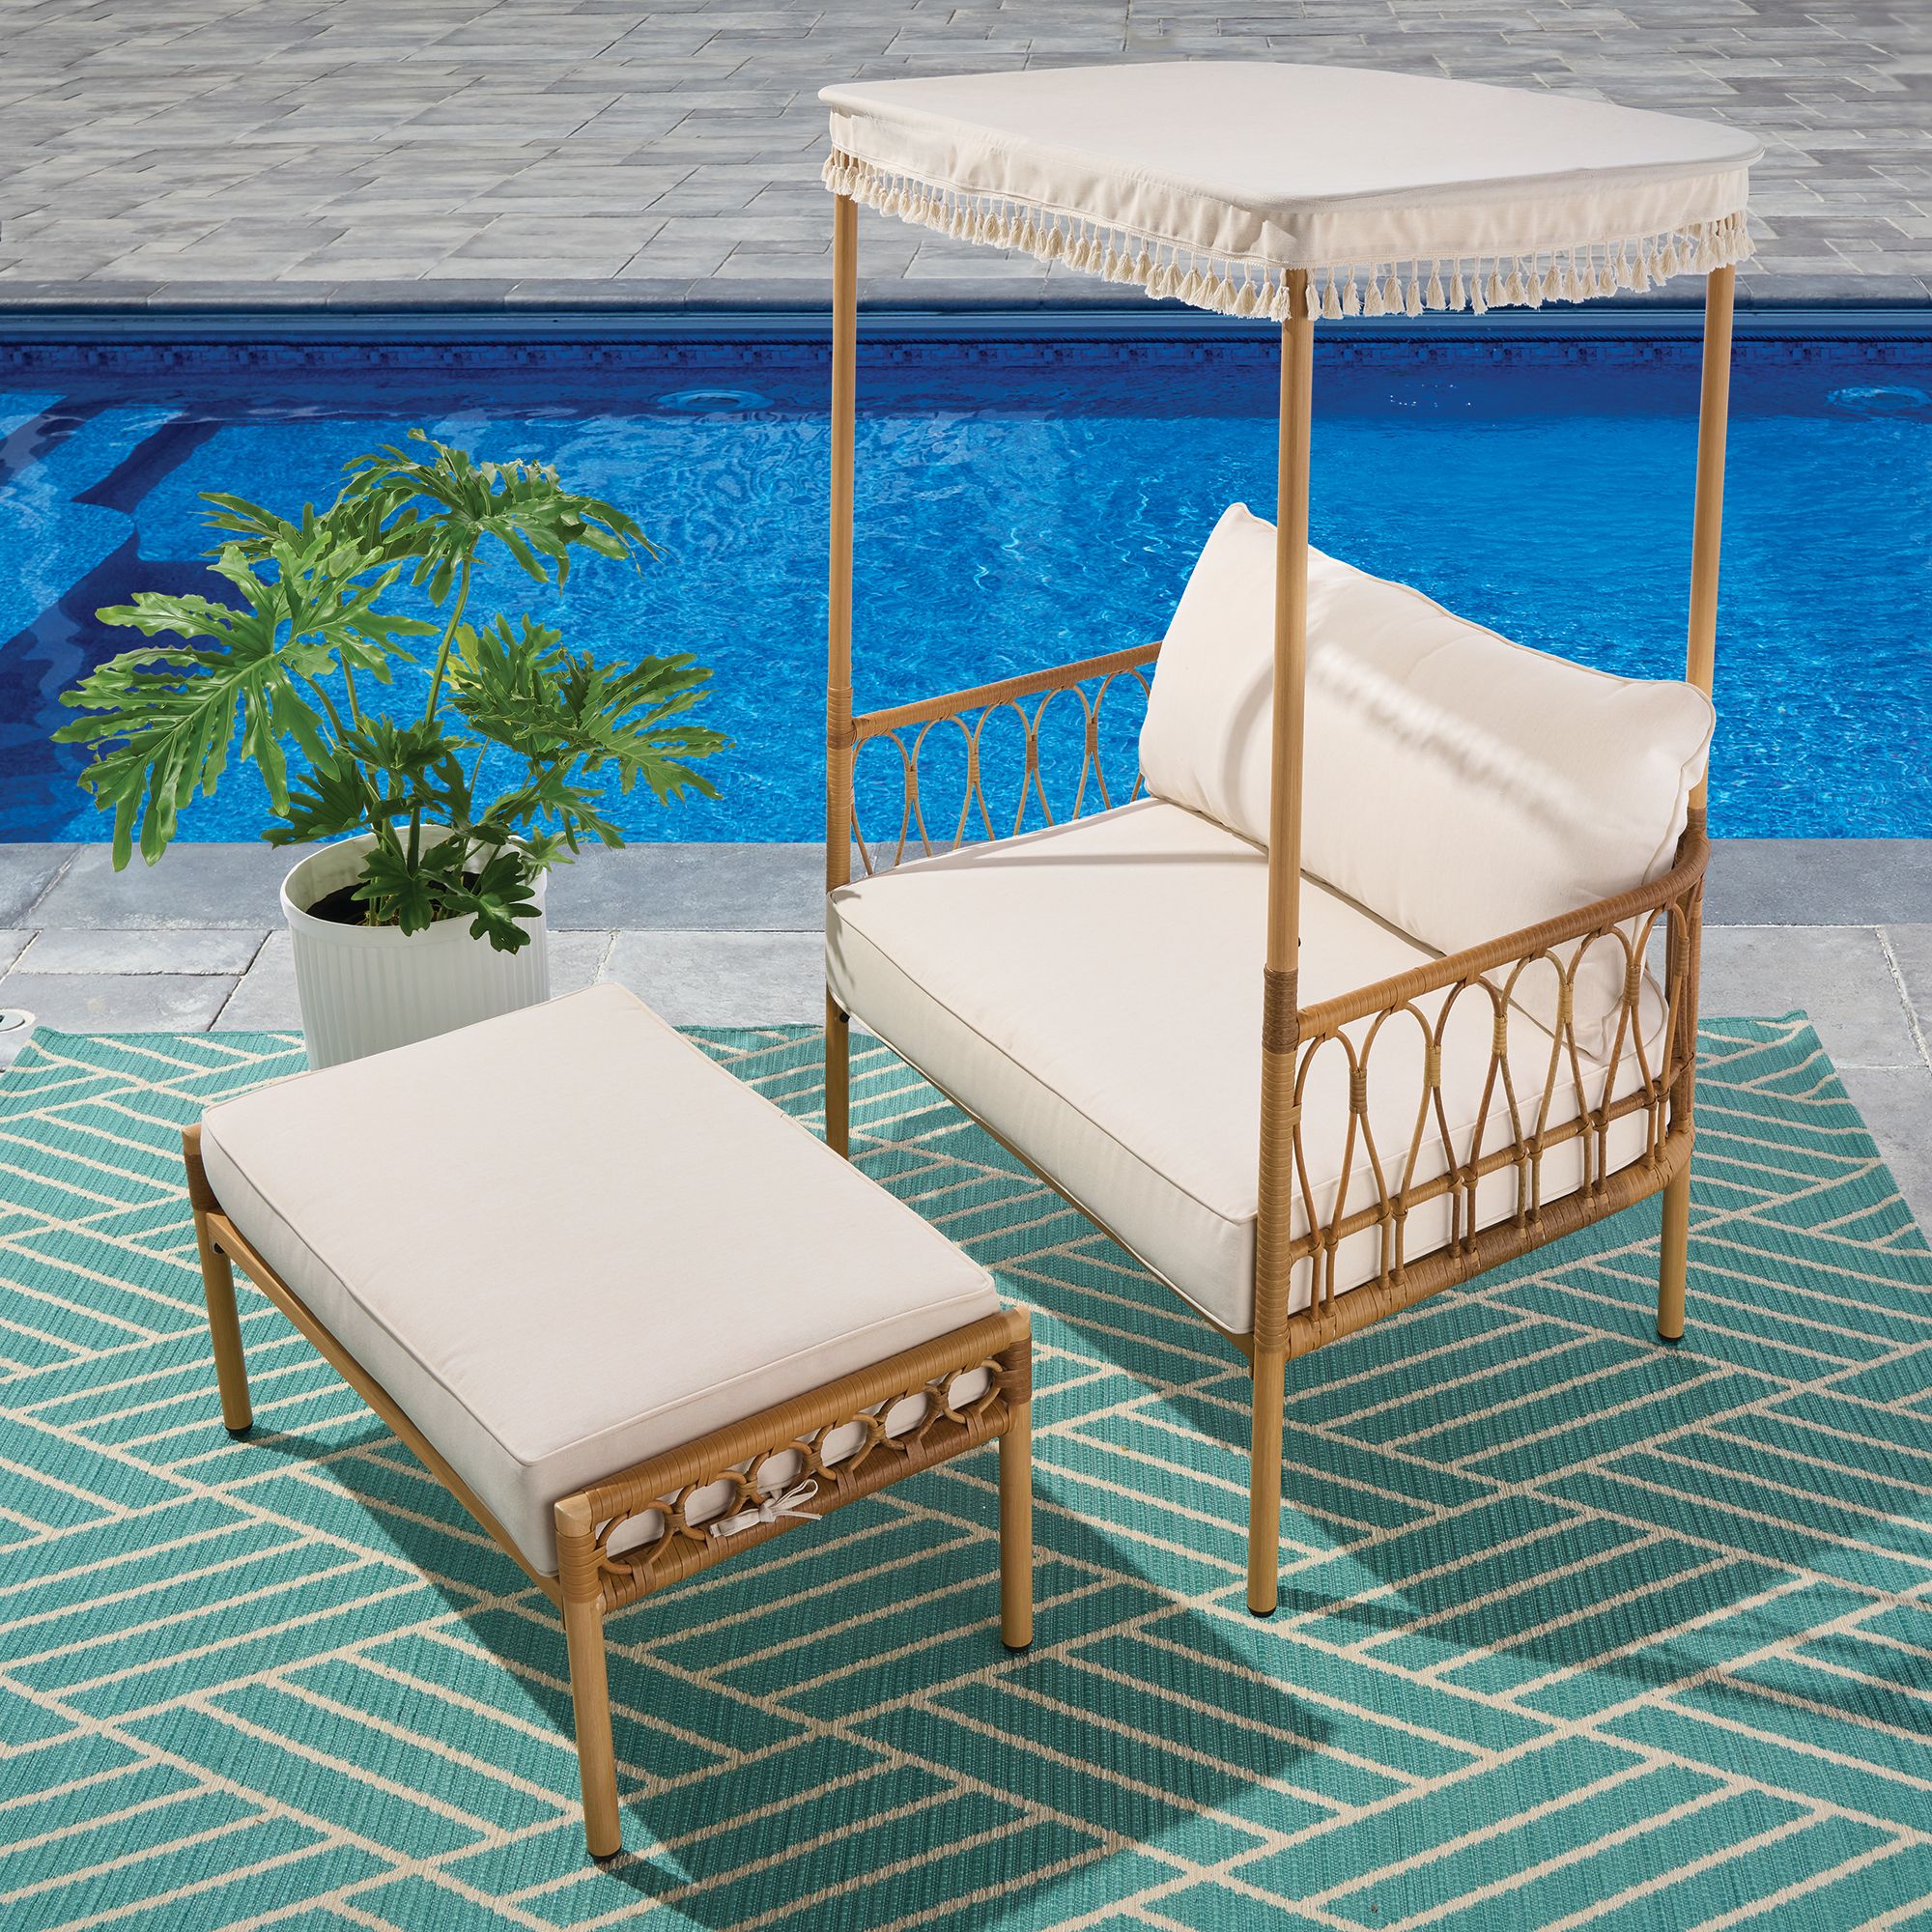 Better Homes & Gardens Willow Sage 2 Piece All-Weather Wicker Outdoor Canopy Chair and Ottoman Set, Beige - image 1 of 7